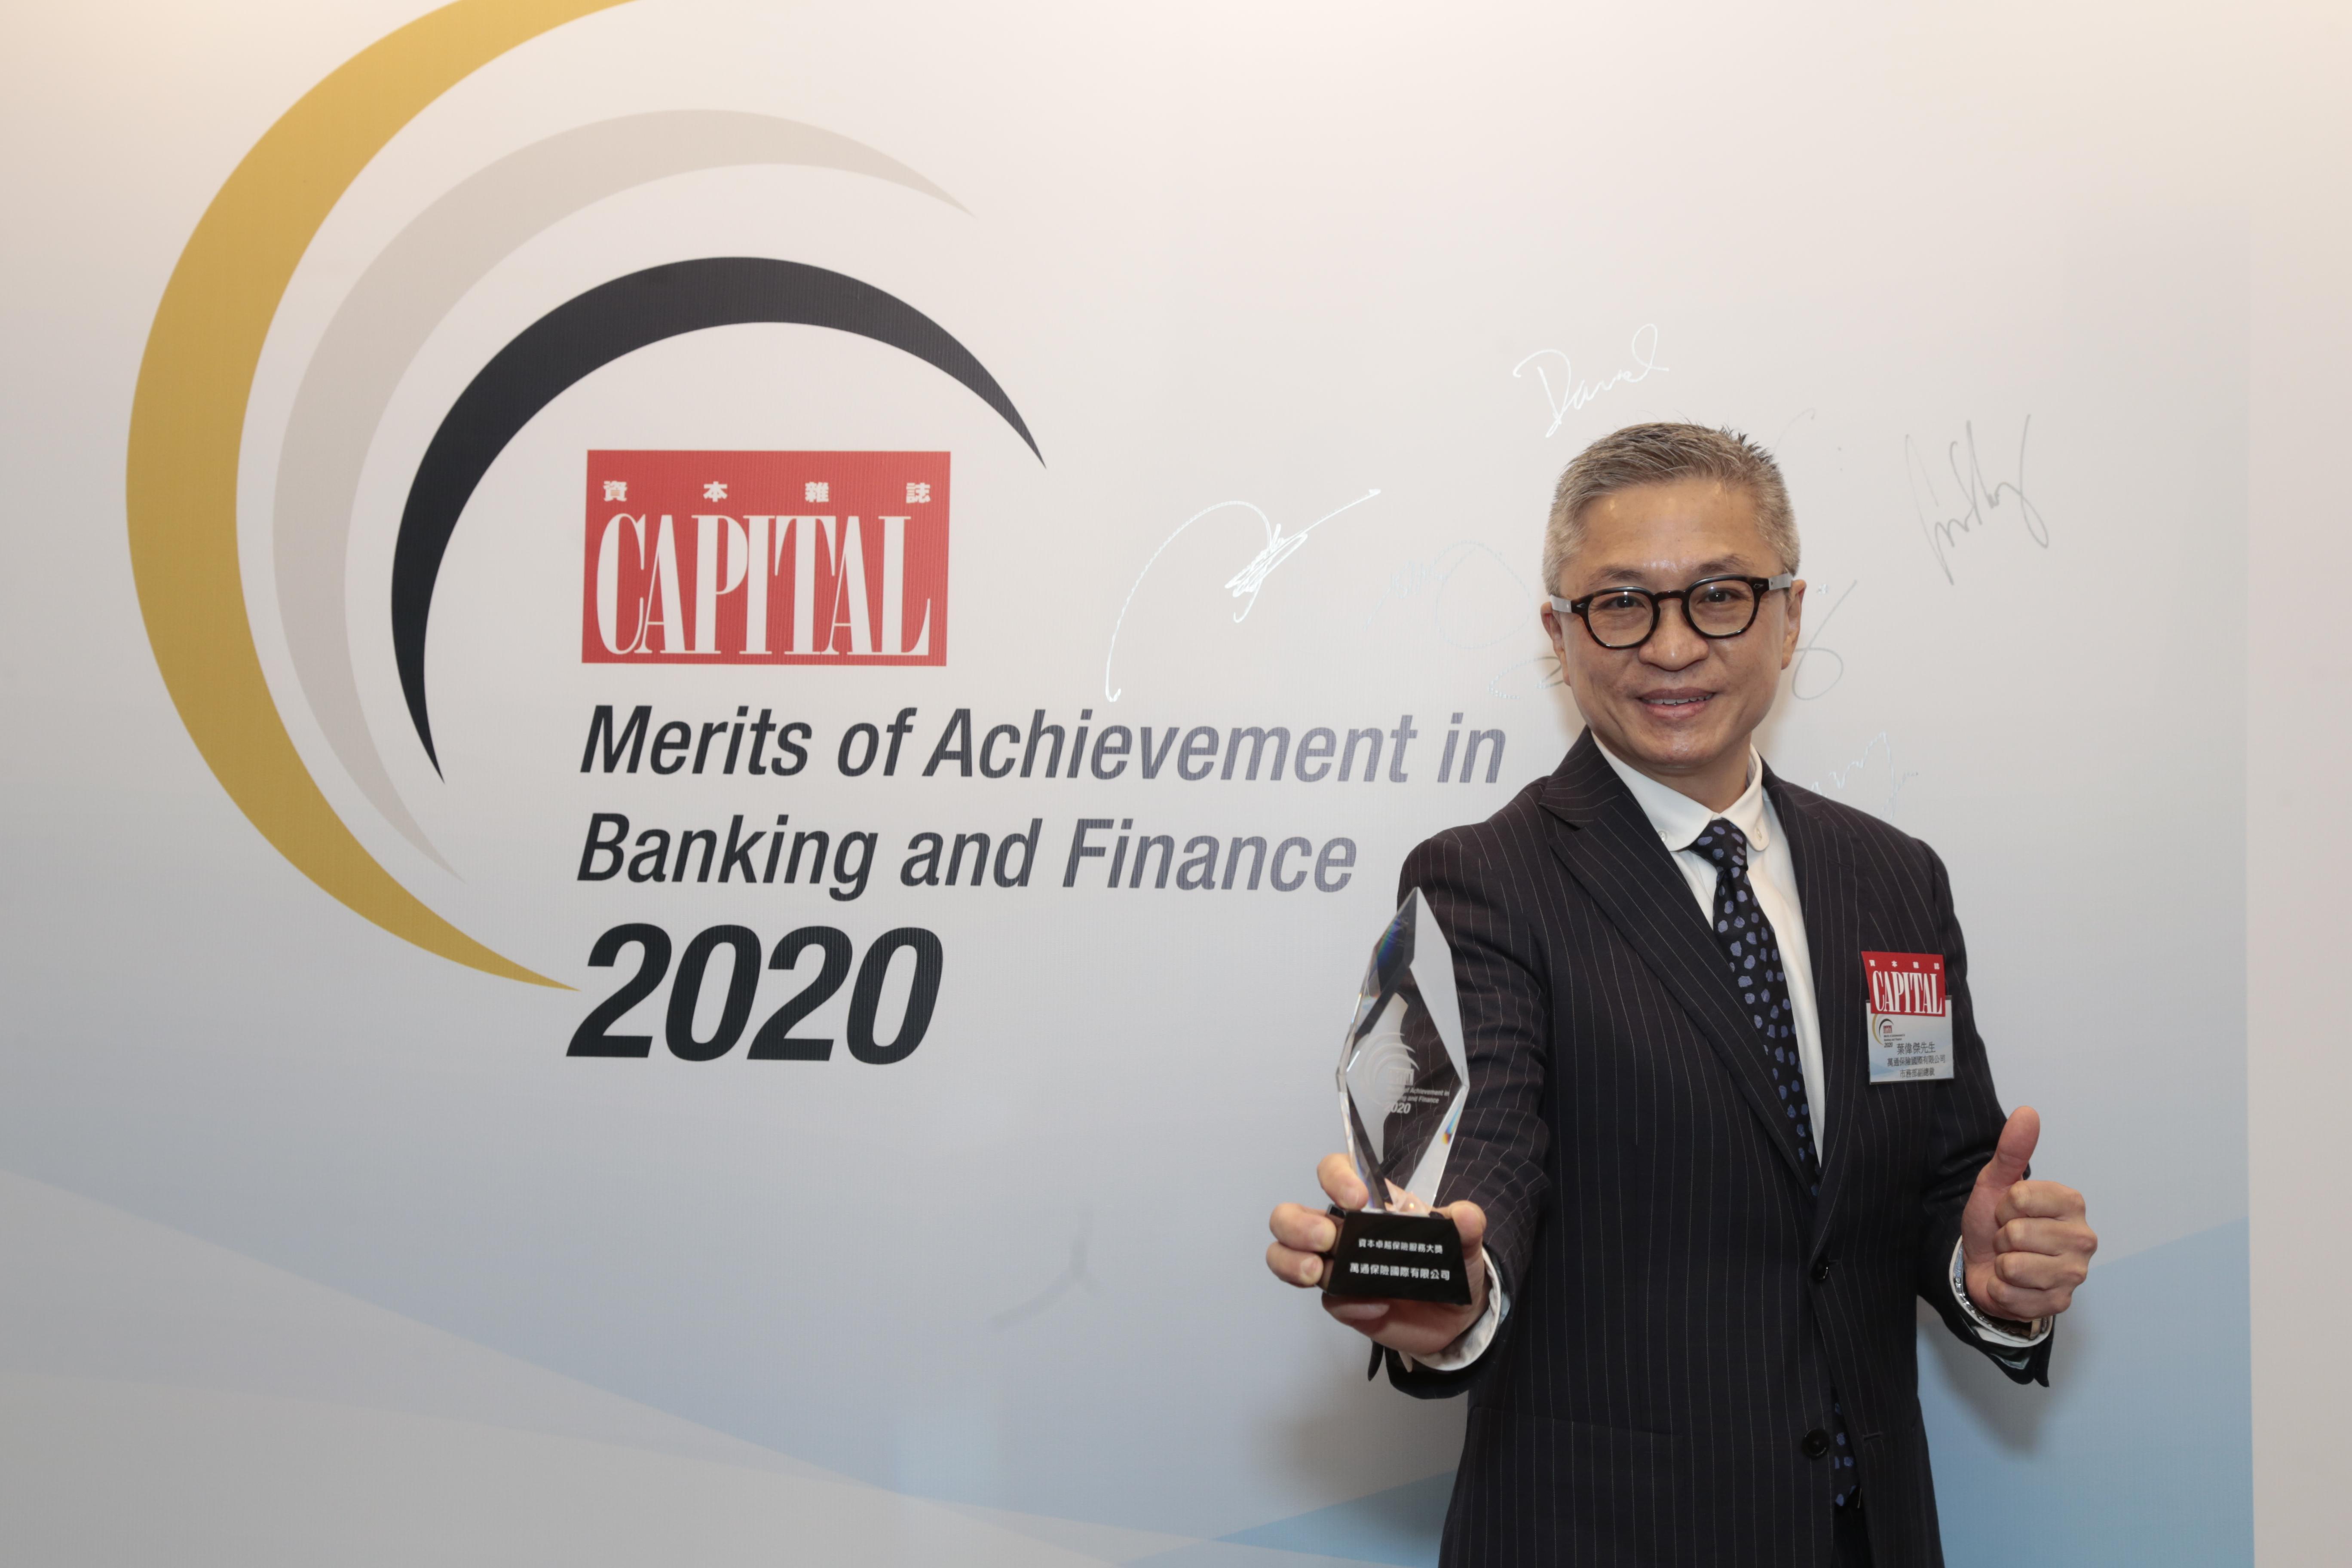 Mr. Peter Yip, Vice President - Marketing of YF Life, receives the “Best in Insurance” award at the “CAPITAL Merits of Achievement in Banking and Finance 2020” awards presentation ceremony.